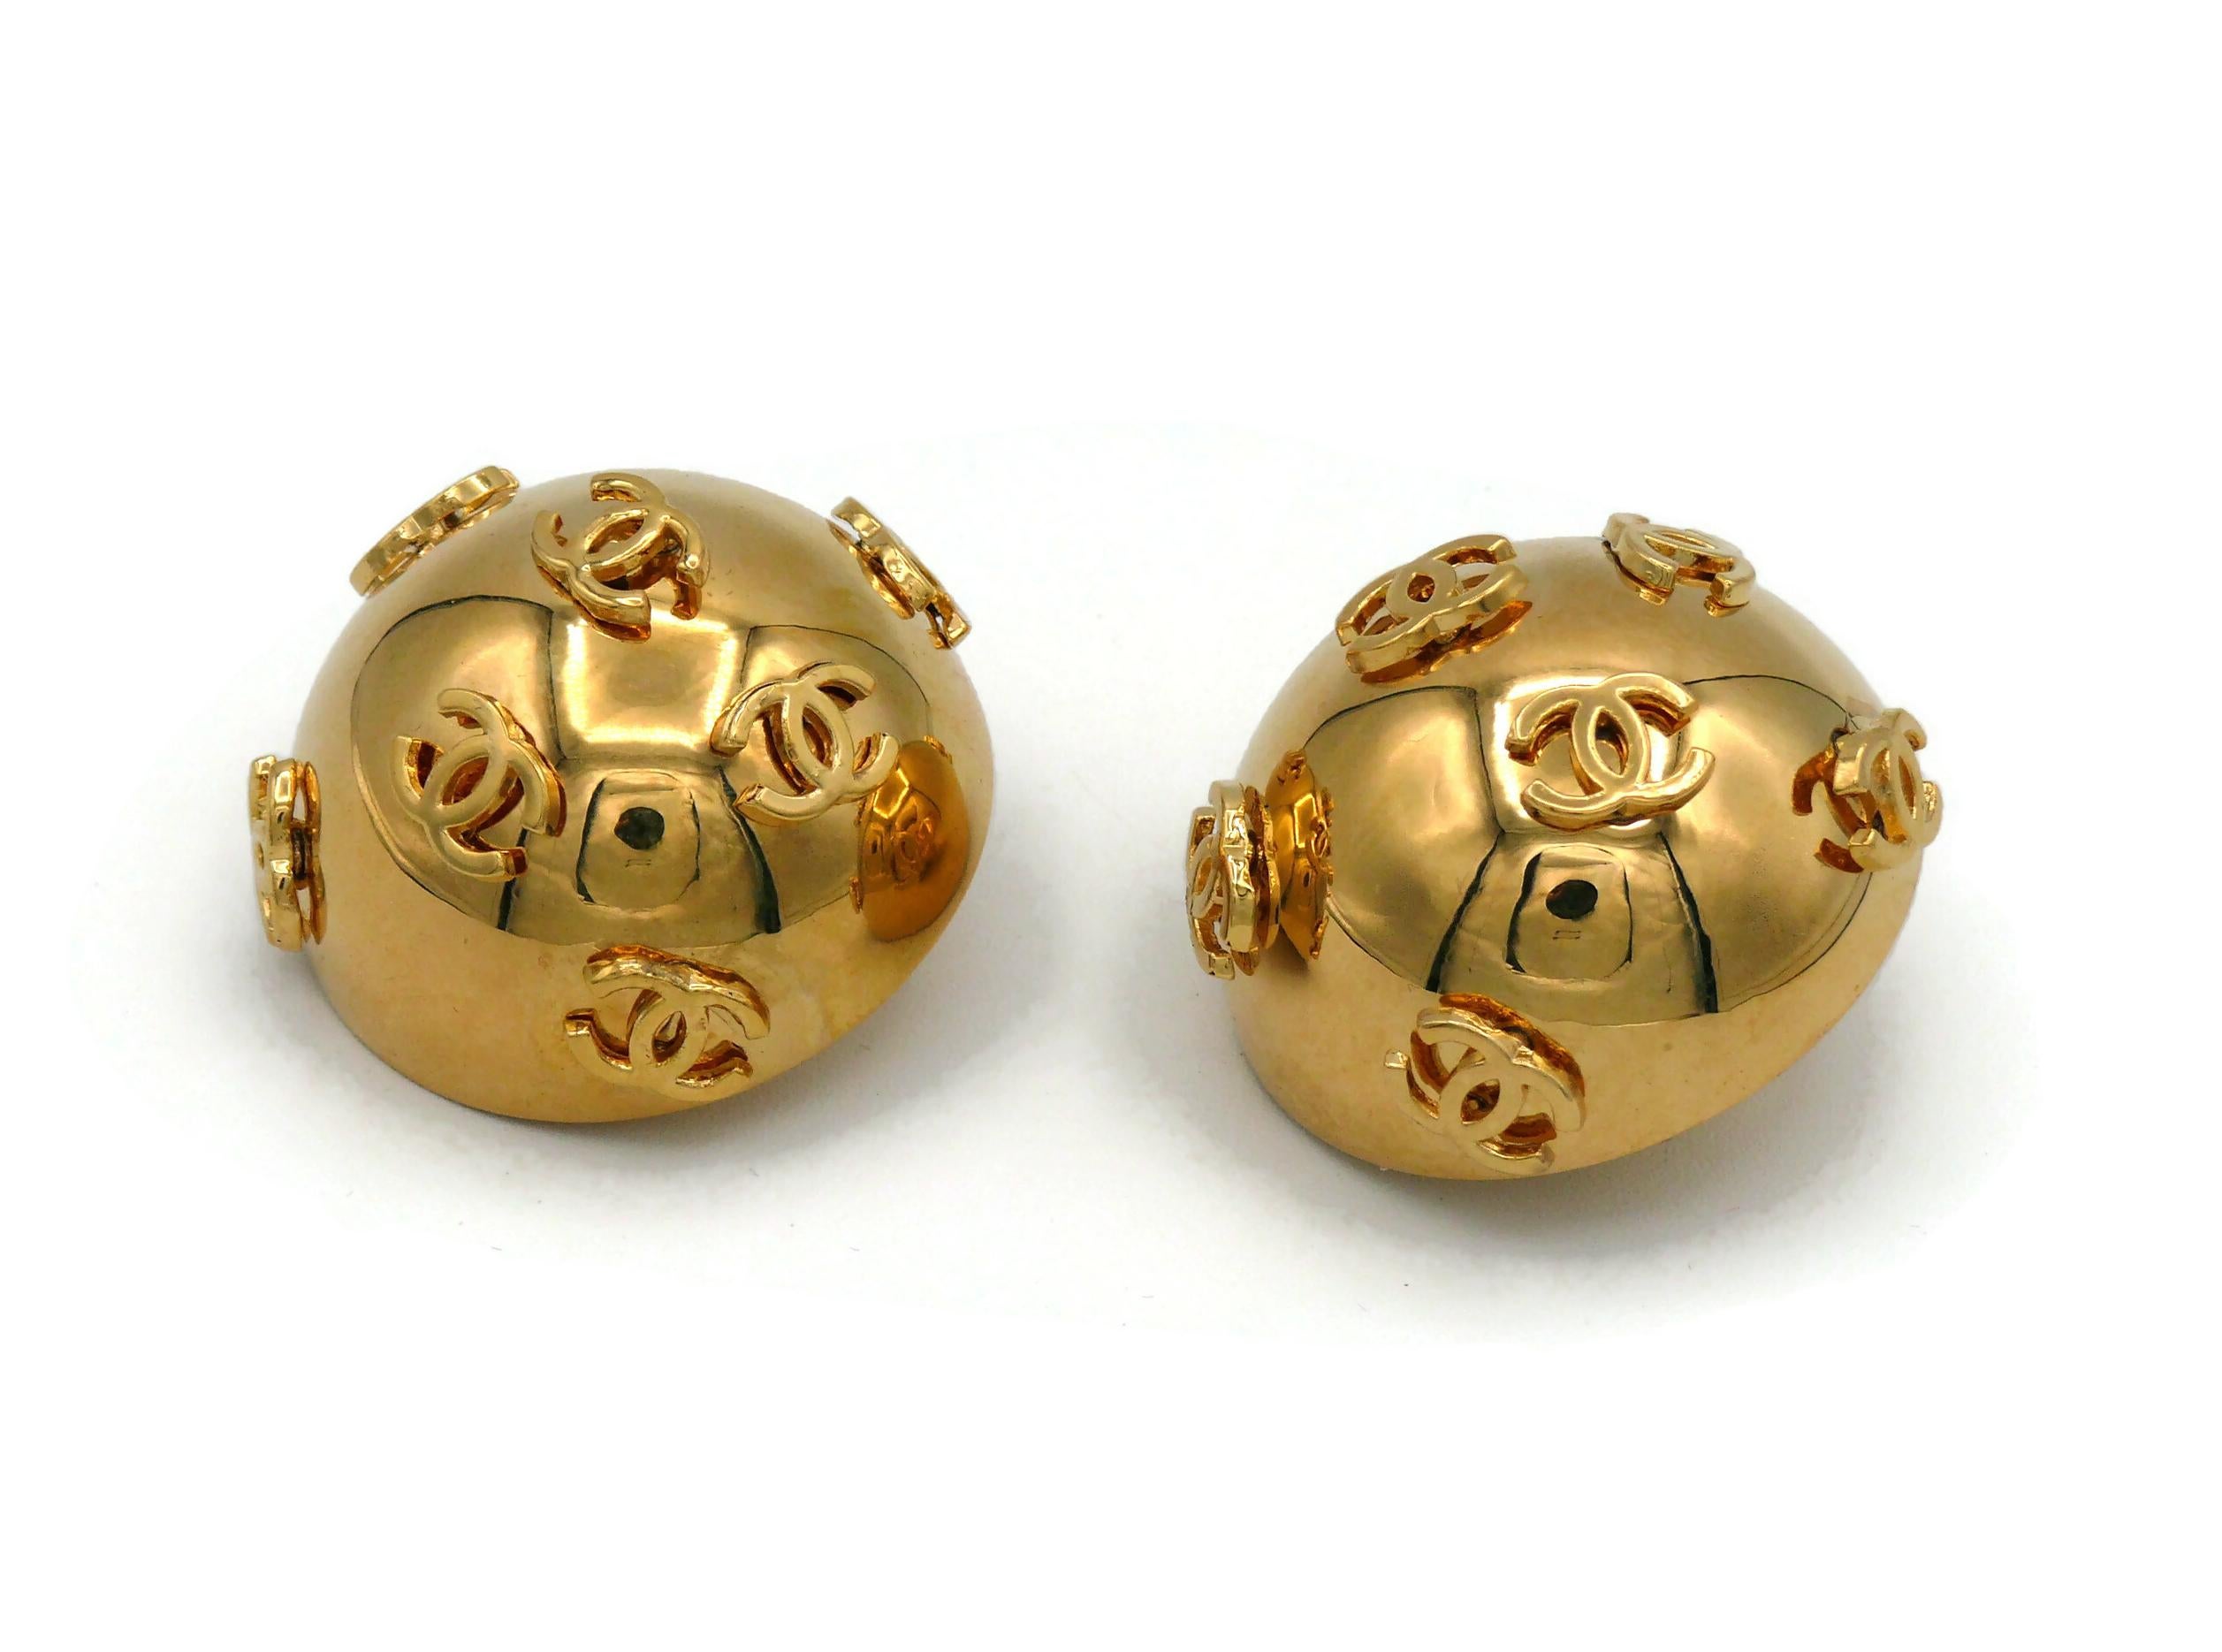 CHANEL by KARL LAGERFELD Vintage Oversized Dome CC Logos Clip-On Earrings, 1992 In Good Condition For Sale In Nice, FR